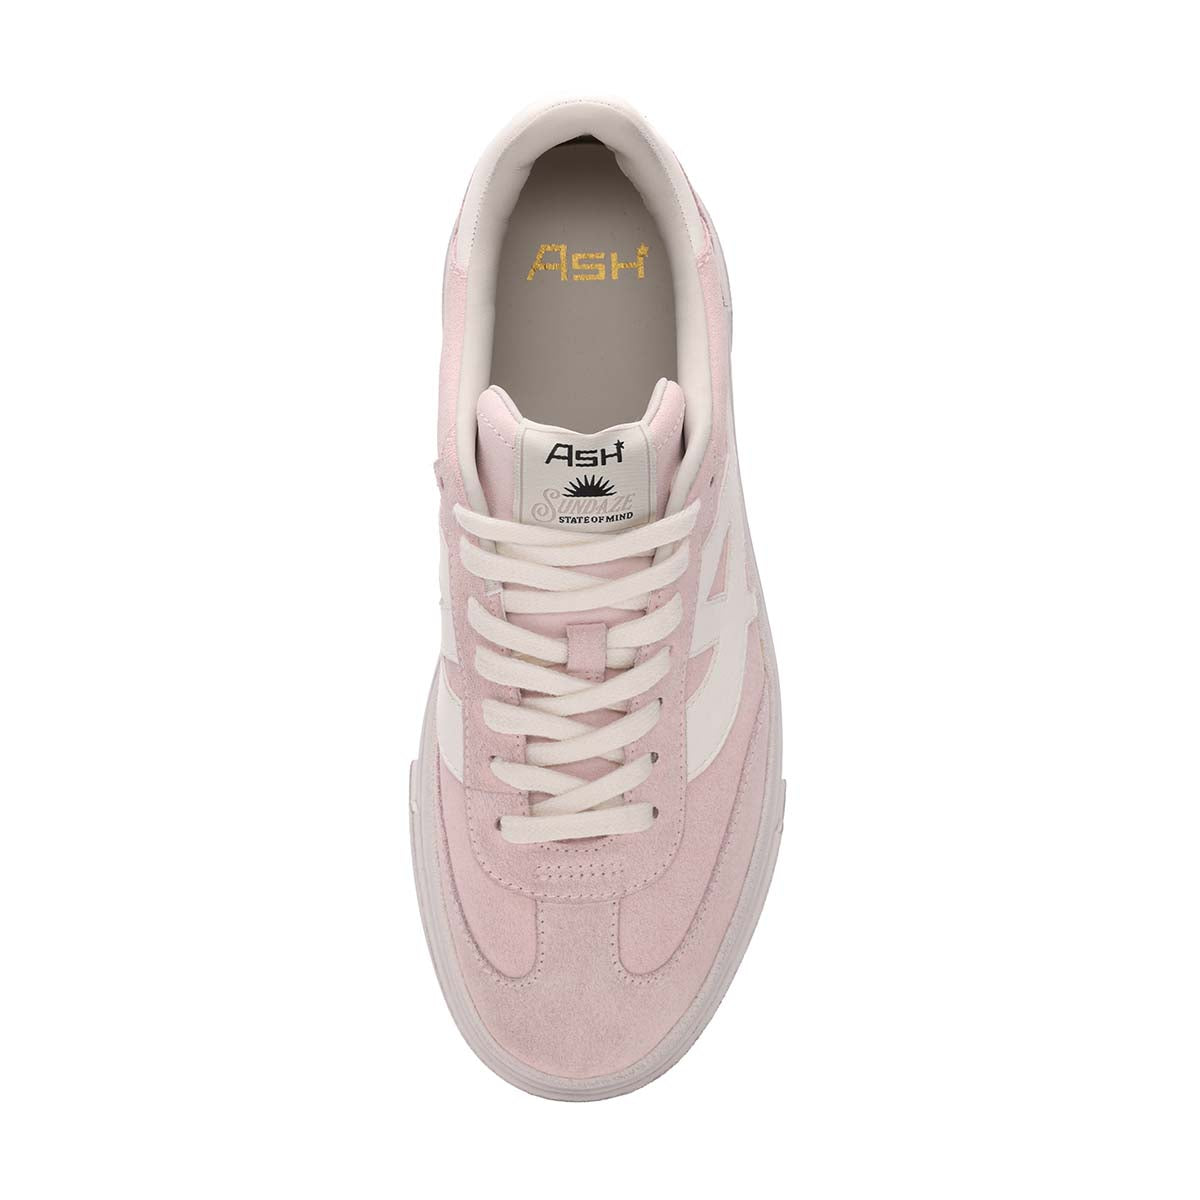 Starmoon Suede Platform Sneakers - Pink/White - Top View - ASH